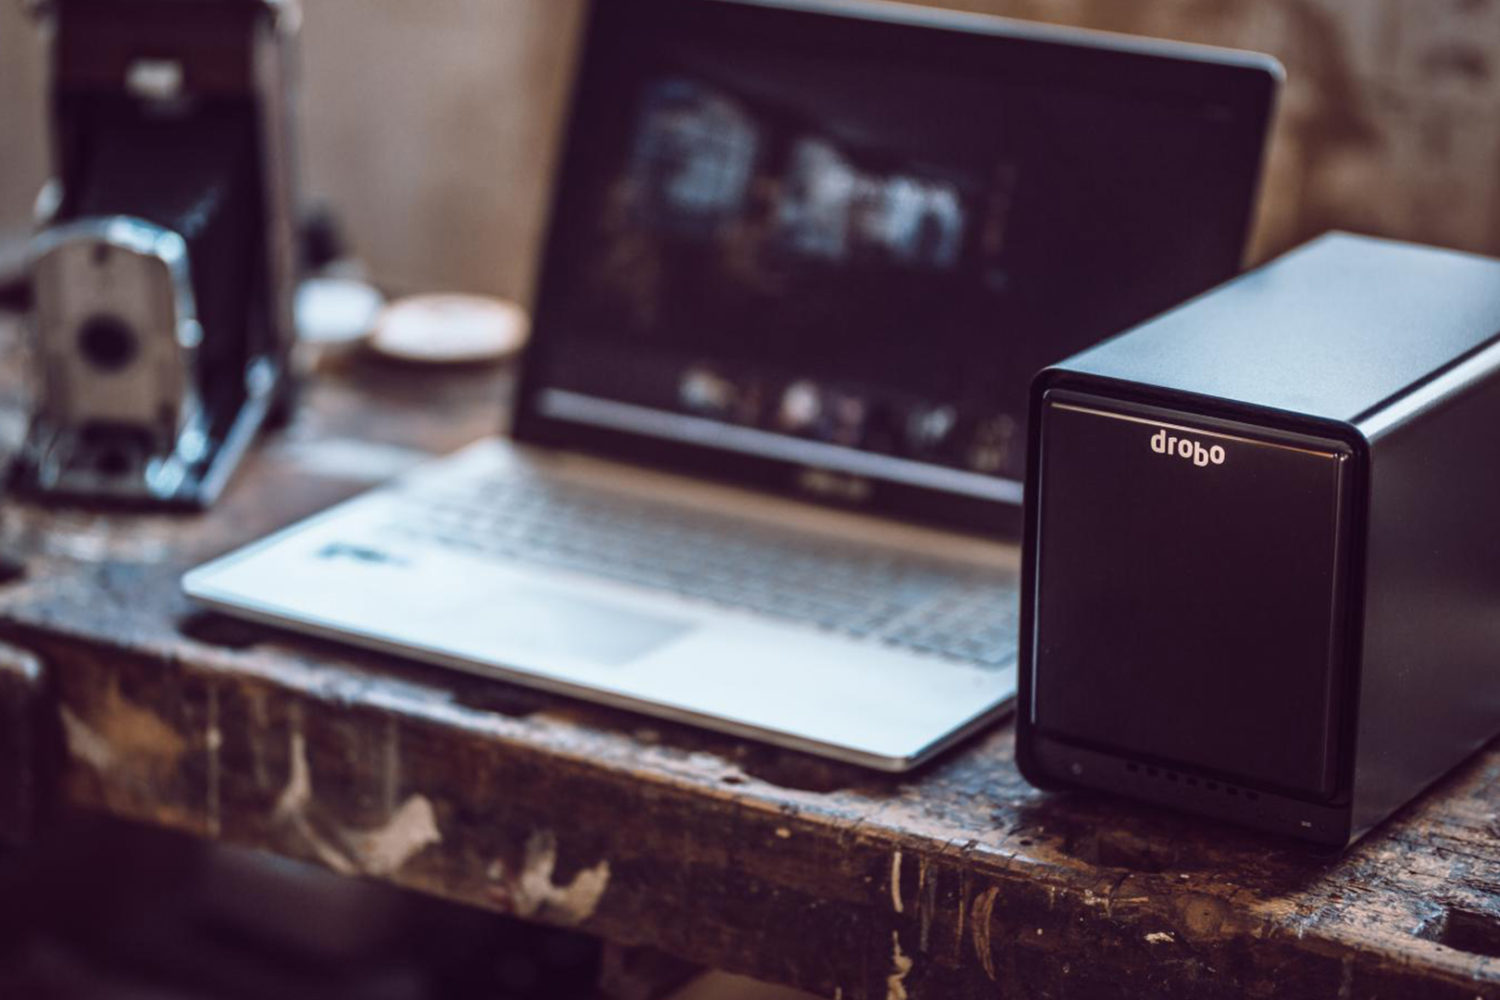 Meet Drobo 5D3: A worry-free photo and data storage solution